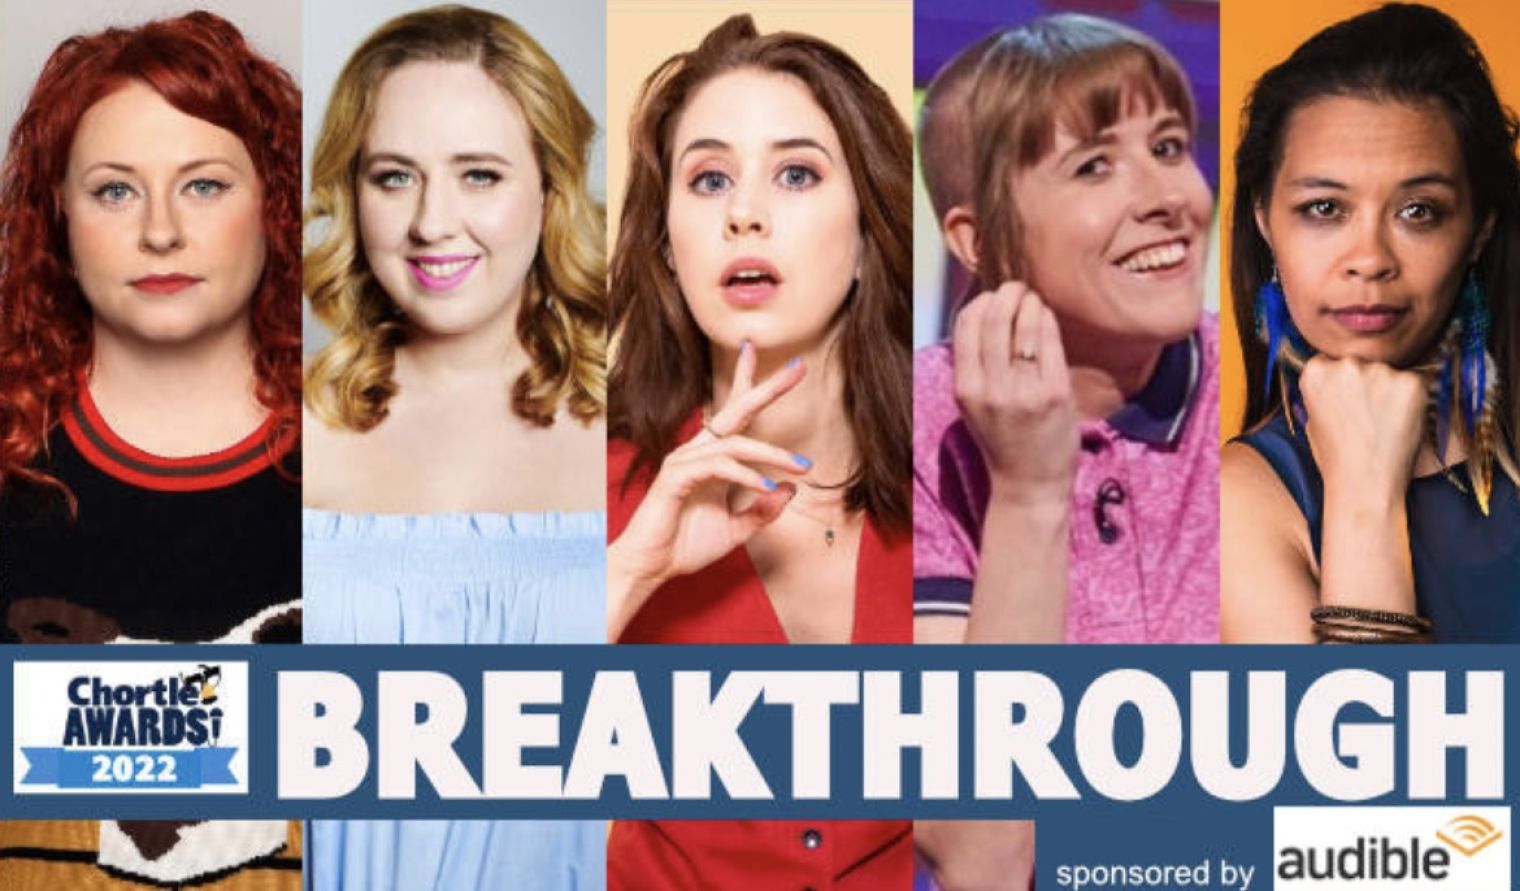 Amy Gledhill has been shortlisted for Best Breakthrough Act in this year's Chortle Awards